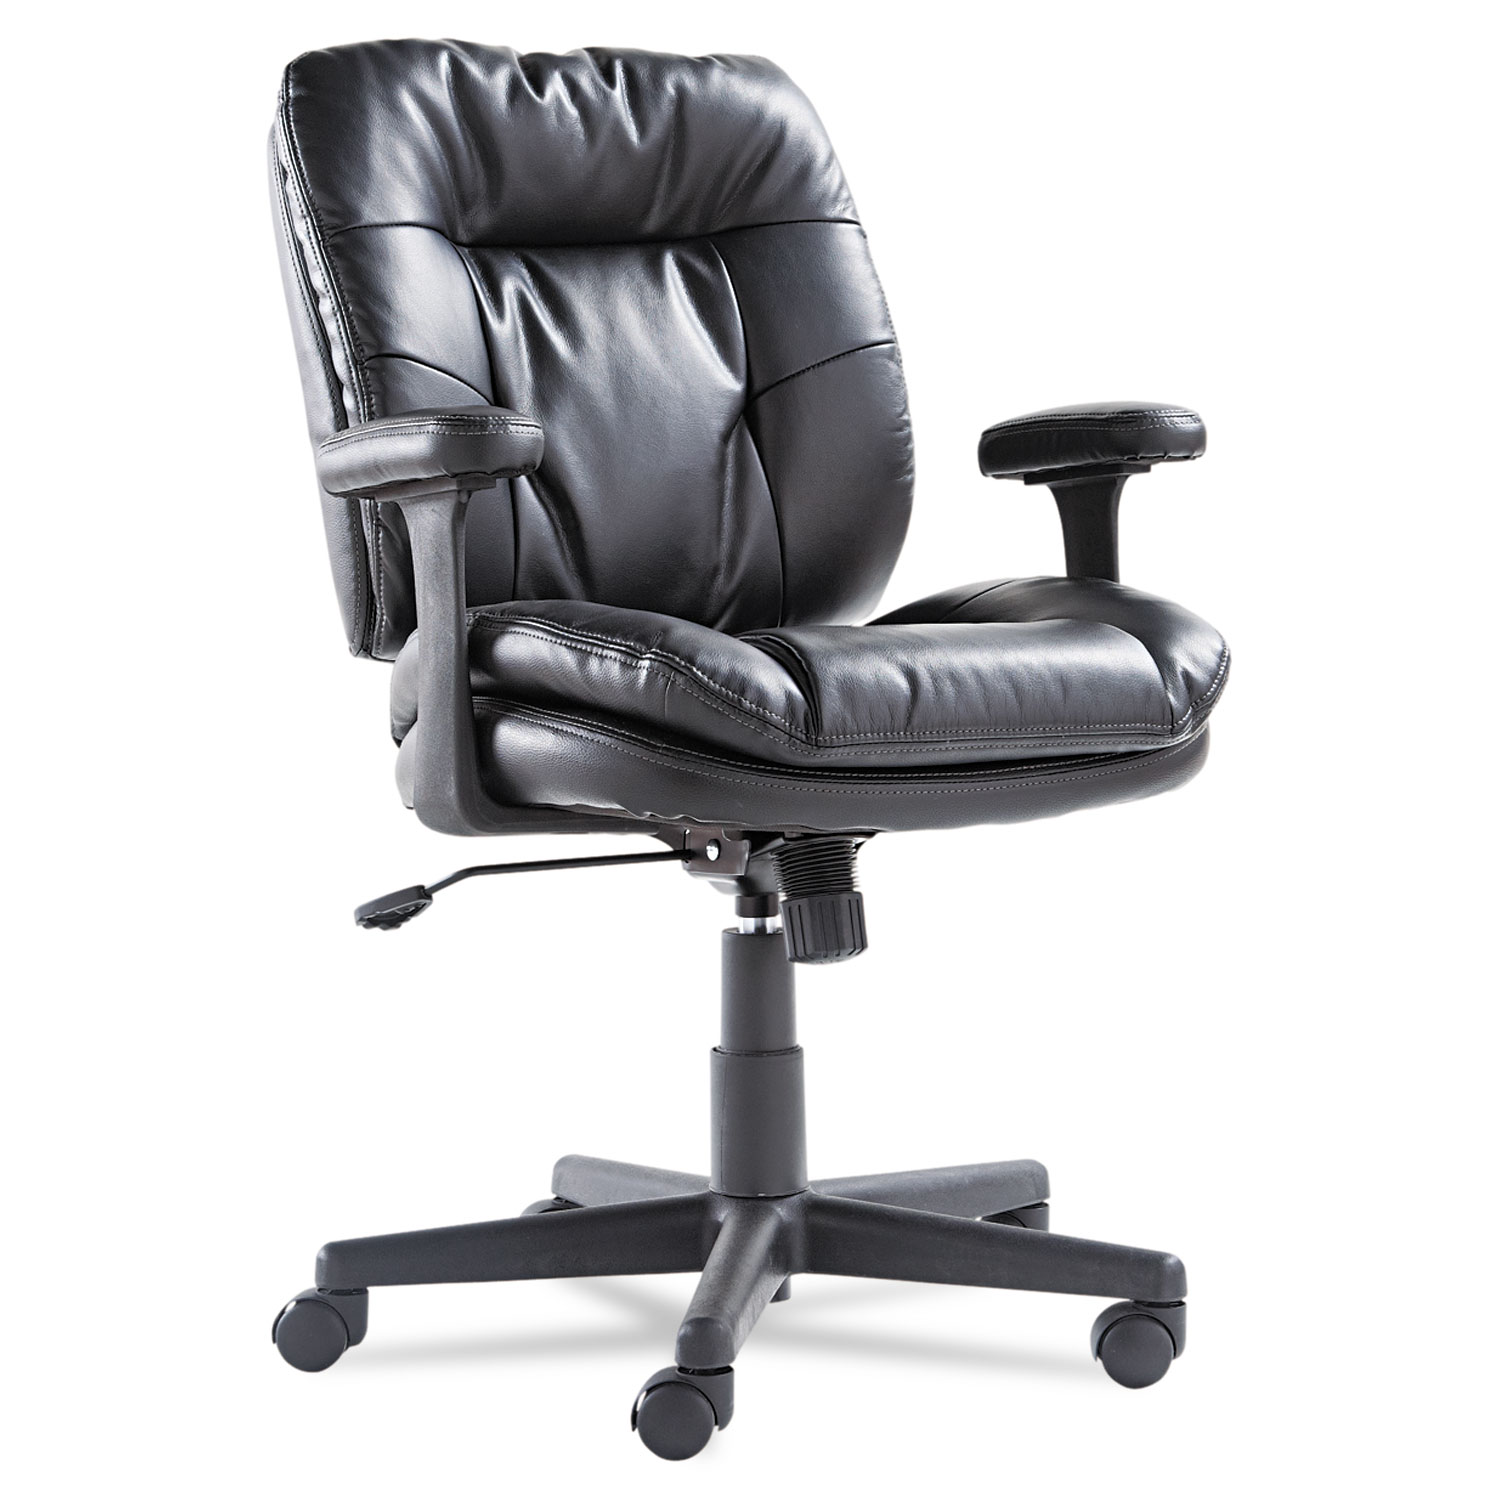  OIF OIFST4819 Executive Swivel/Tilt Chair, Supports up to 250 lbs., Black Seat/Black Back, Black Base (OIFST4819) 